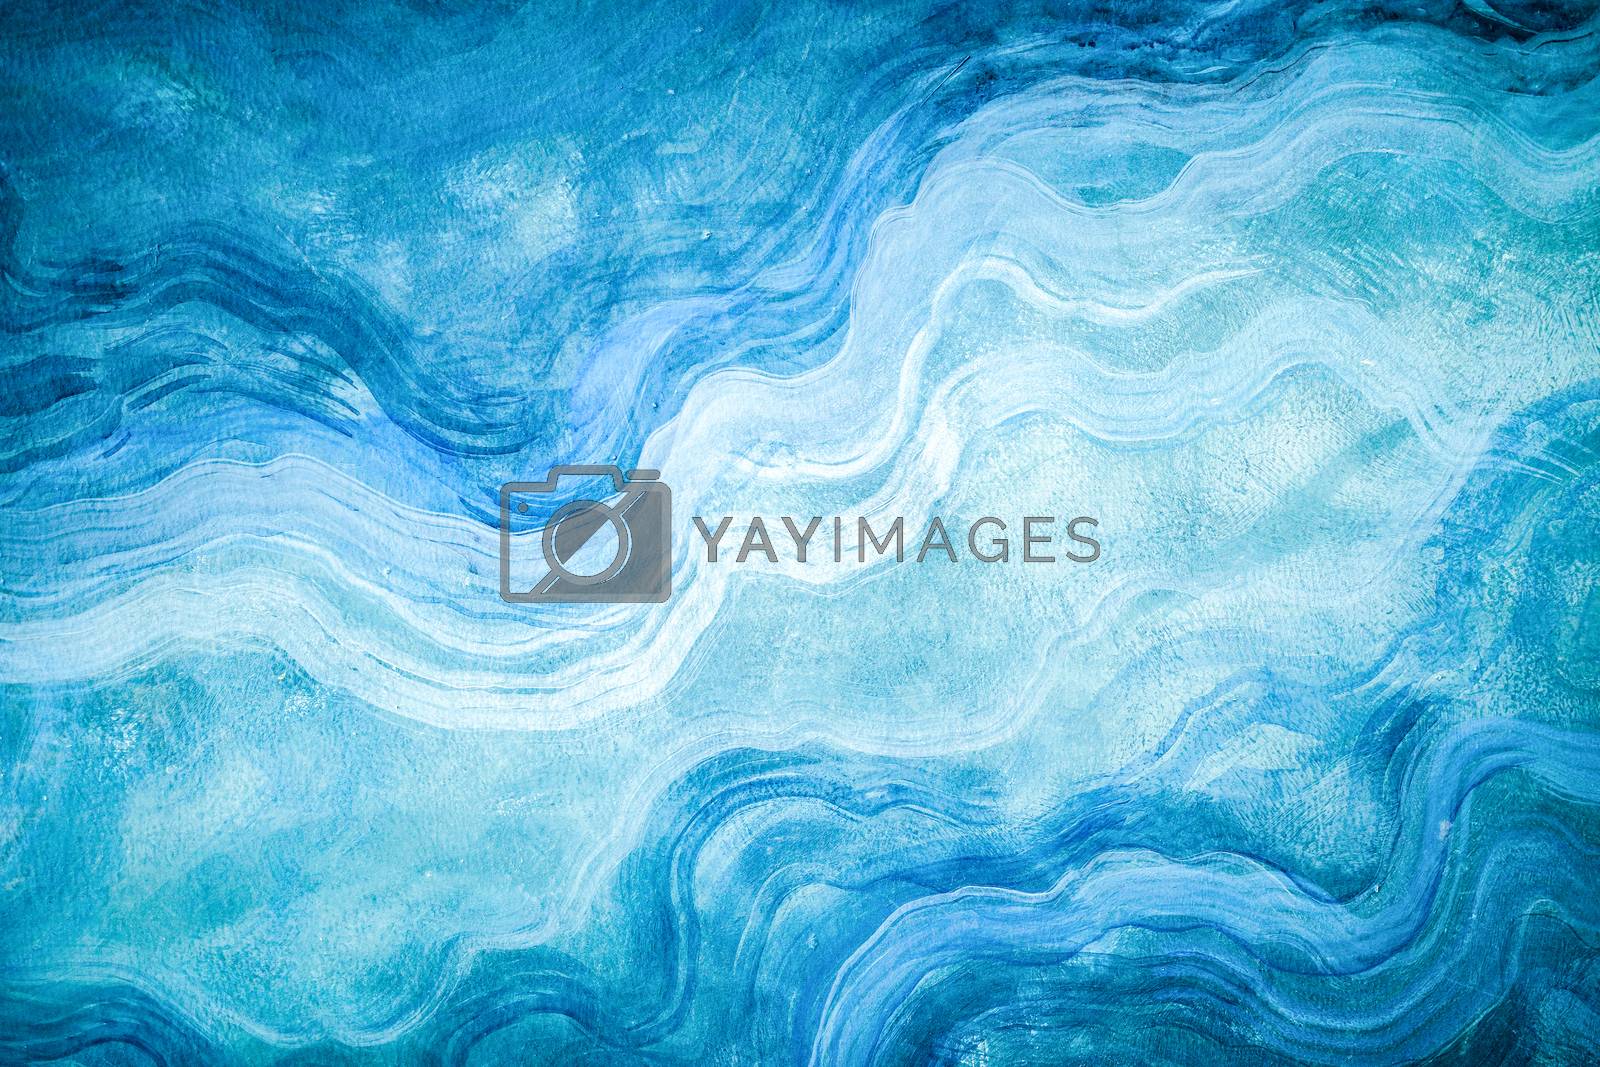 Royalty free image of Abstract background of blue wave by jack-sooksan